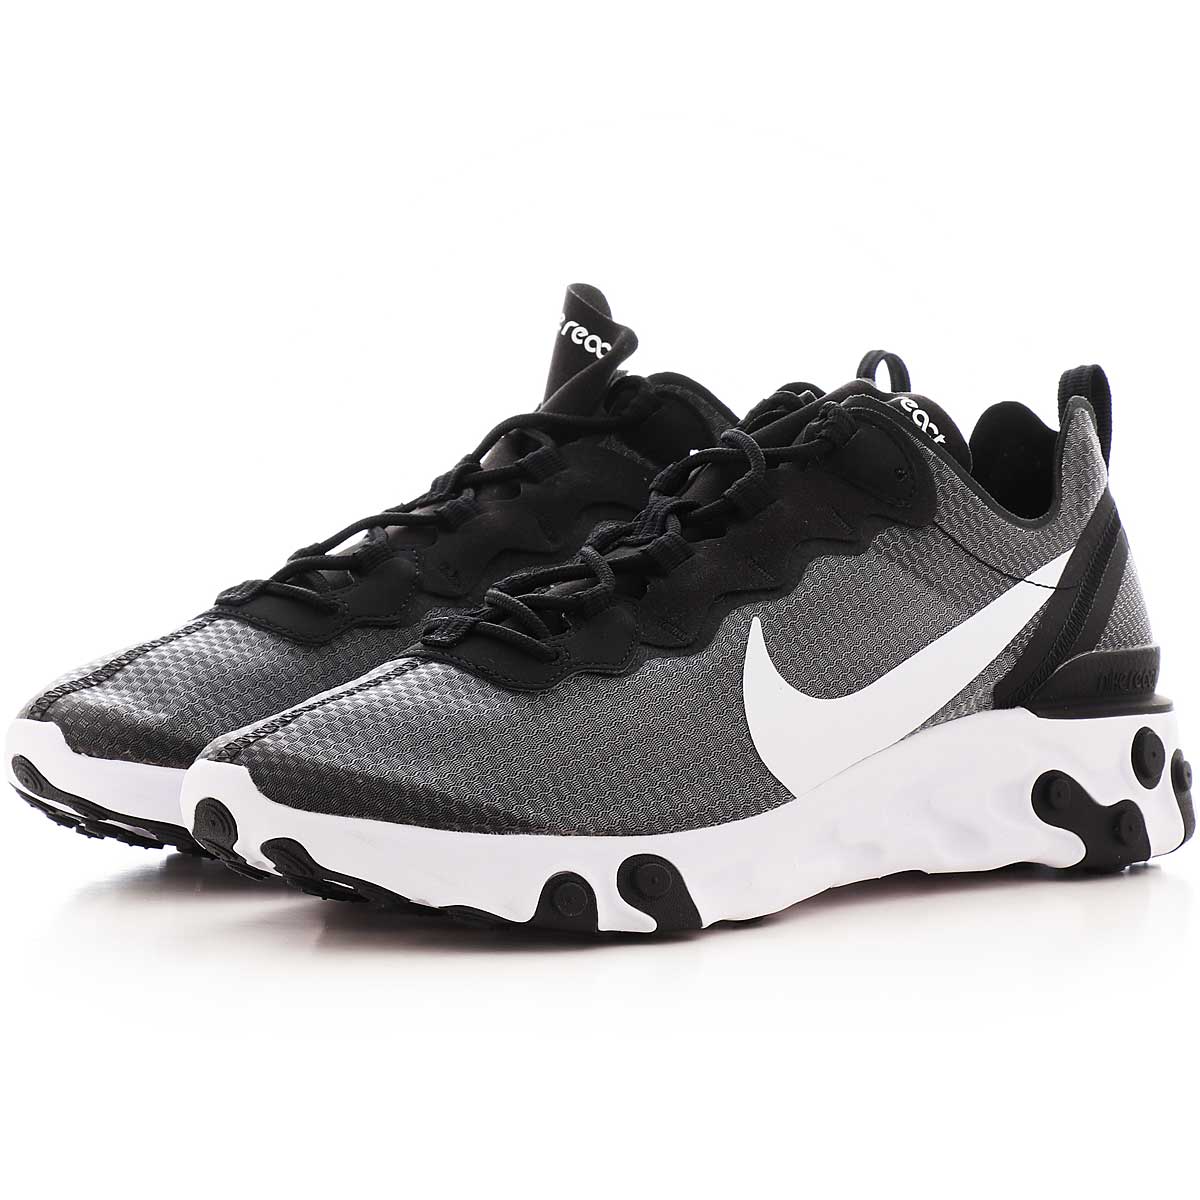 Buy REACT ELEMENT 55 SE for N/A 0.0 on 